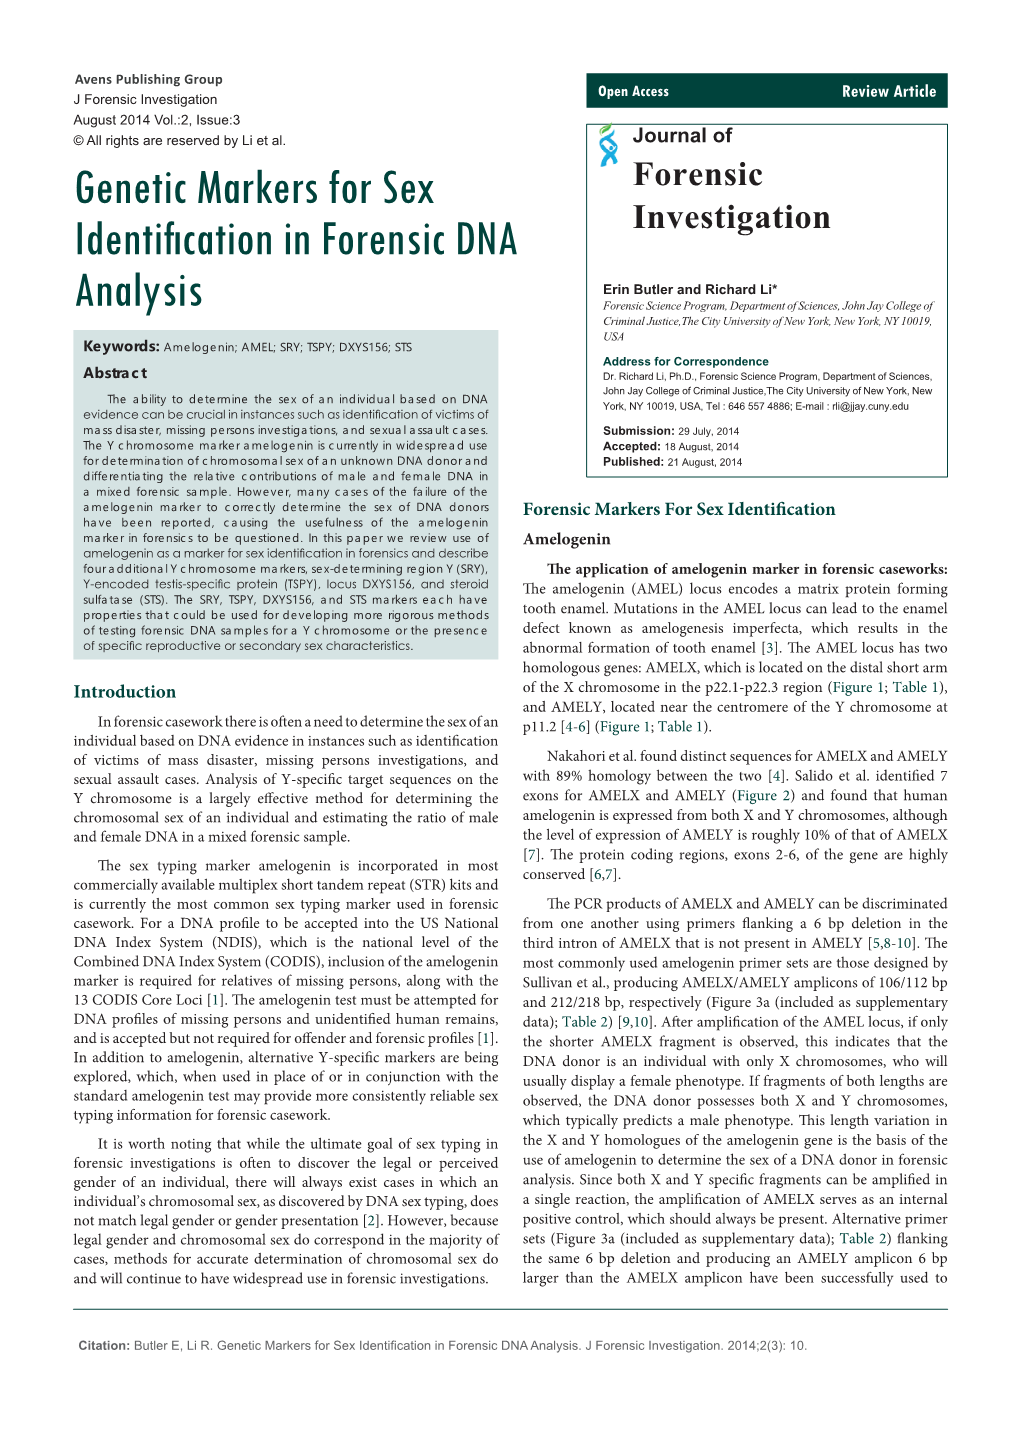 Genetic Markers for Sex Identification in Forensic DNA Analysis